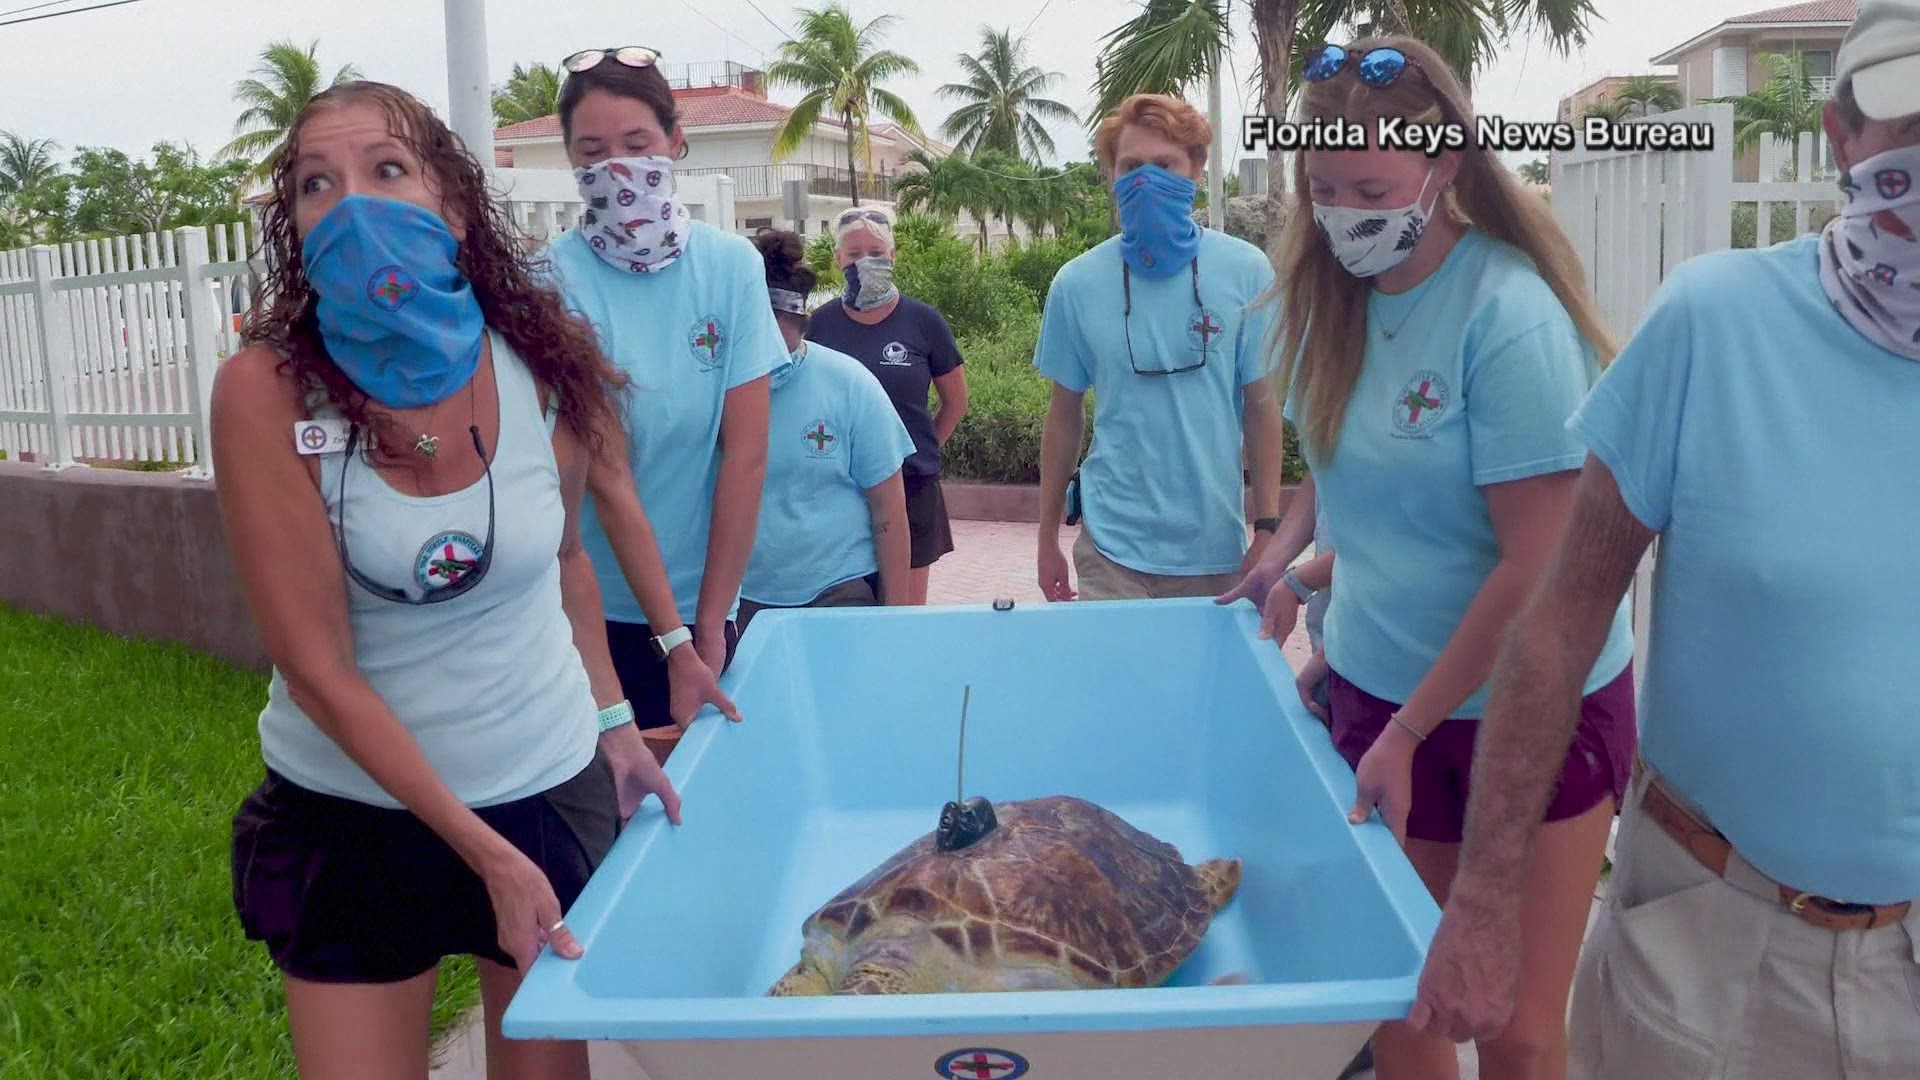 A rare sea turtle was released back into the sea from the Florida Keys wearing a new satellite tracker on her shell.